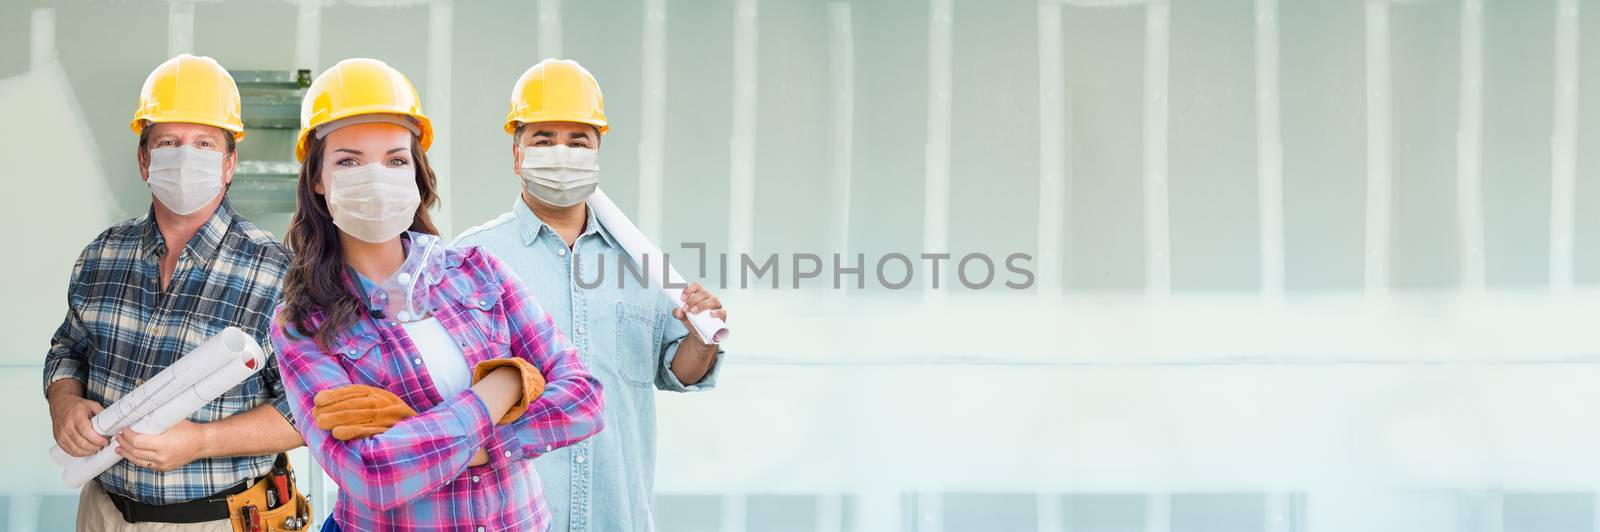 Female and Male Contractors In Hard Hats Wearing Medical Face Masks At Construction Site During Coronavirus Pandemic Banner.